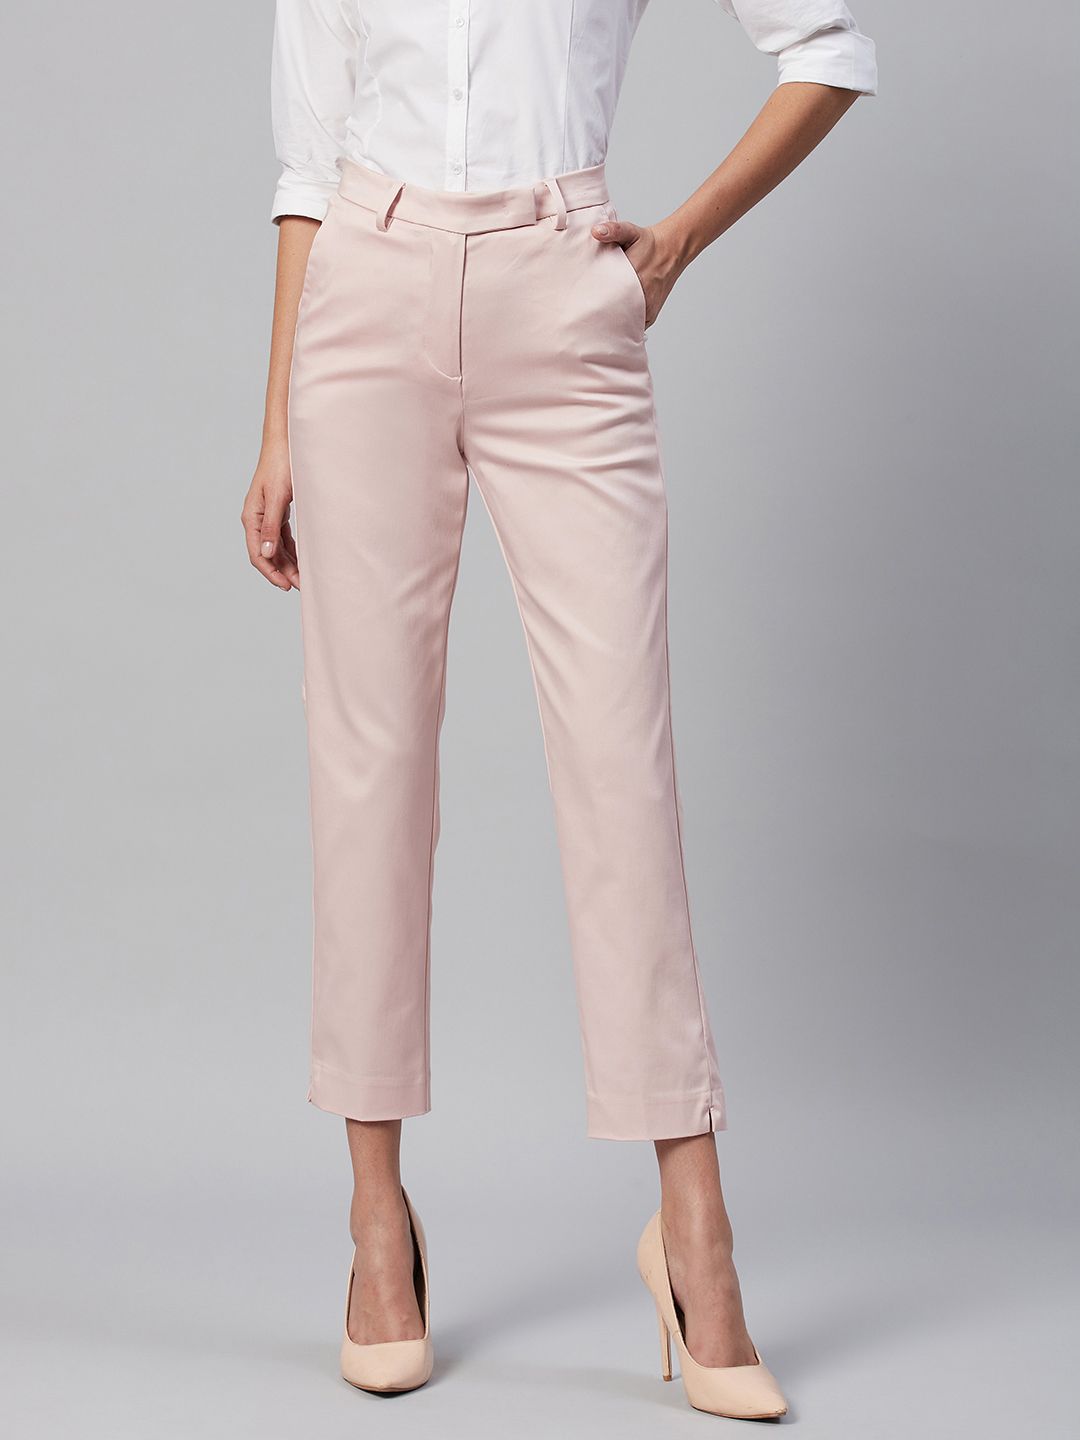 Marks & Spencer Women Pink Slim Fit Trousers Price in India